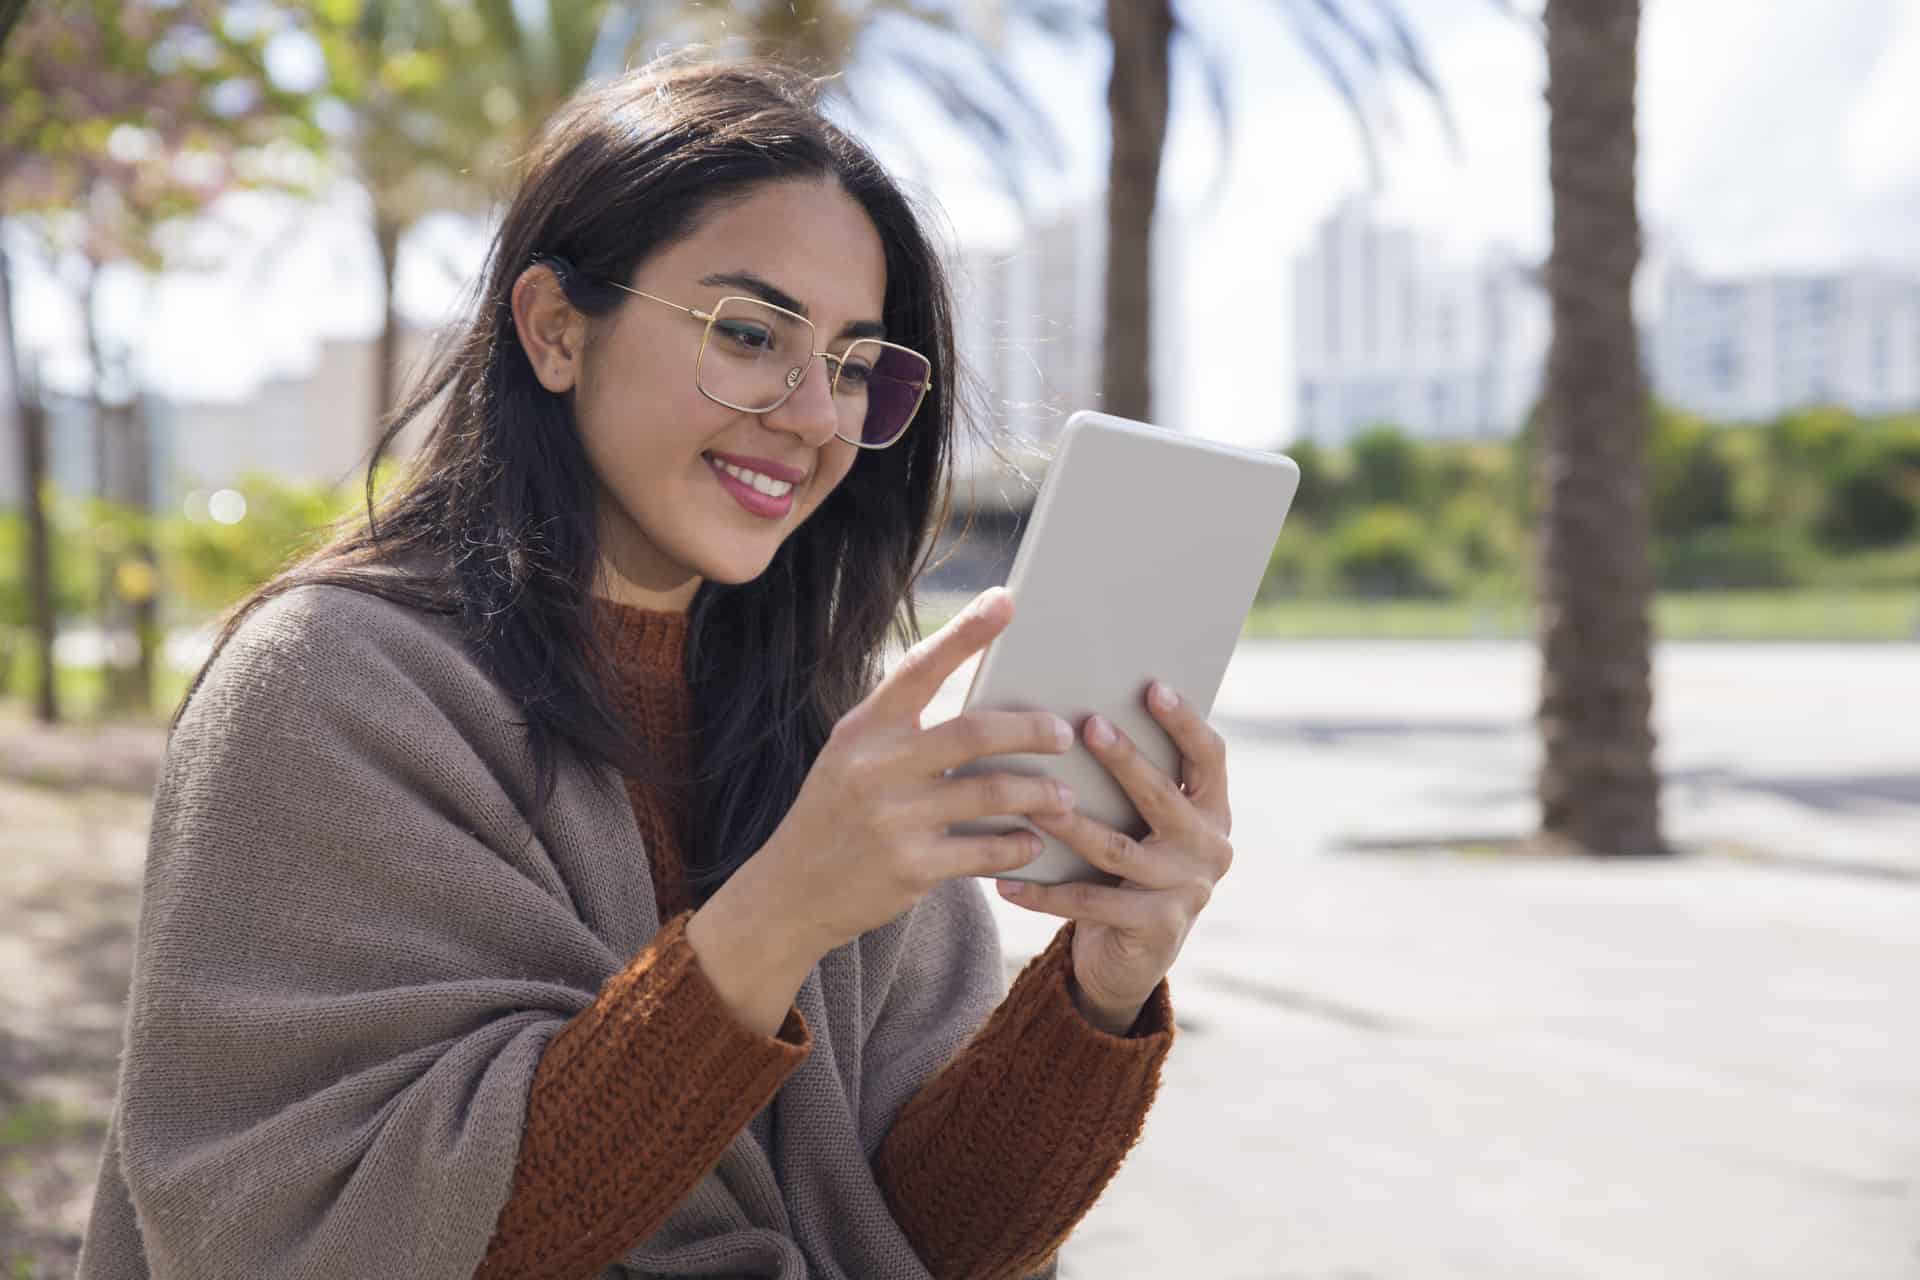 Smiling pretty woman using tablet computer outdoors. Young woman holding gadget with blurred trees and walkway in background. Technology concept.